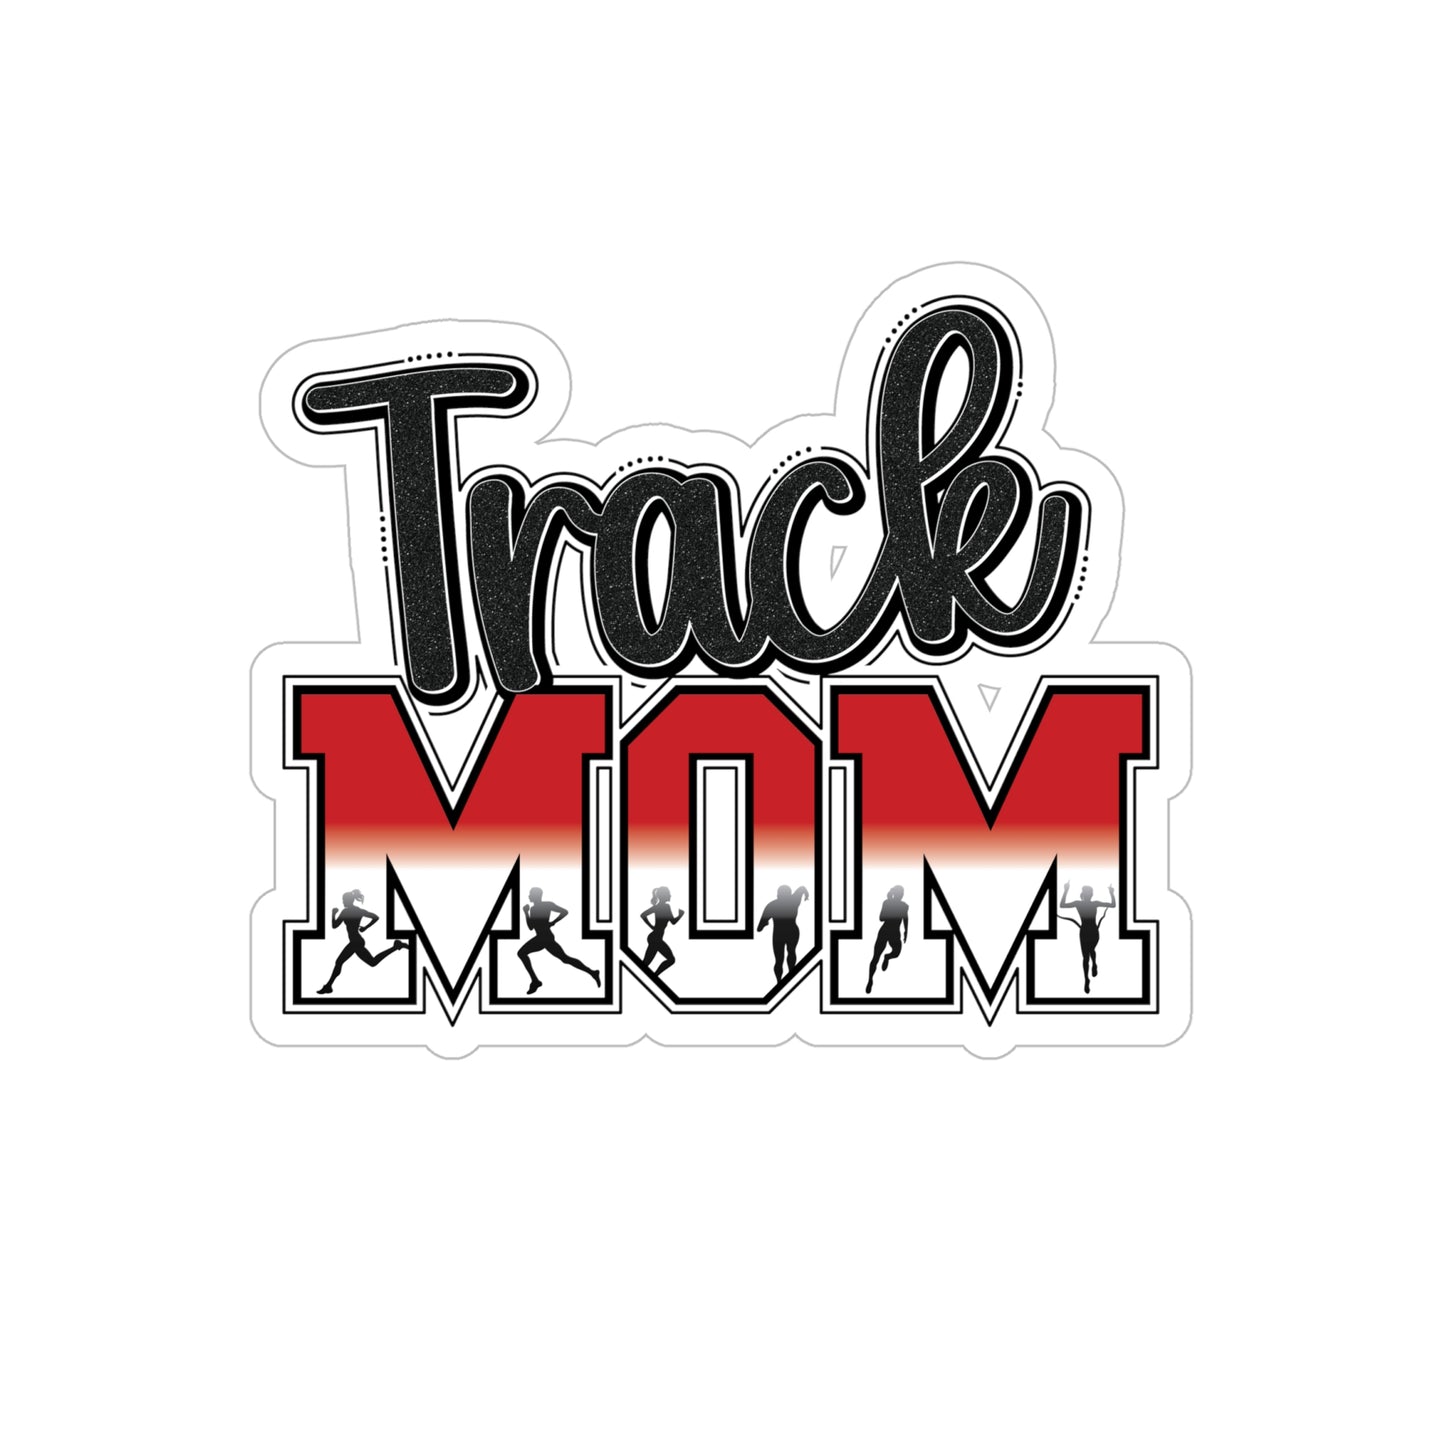 Transparent Outdoor Stickers, Die-Cut, 1pcs - Track Mom